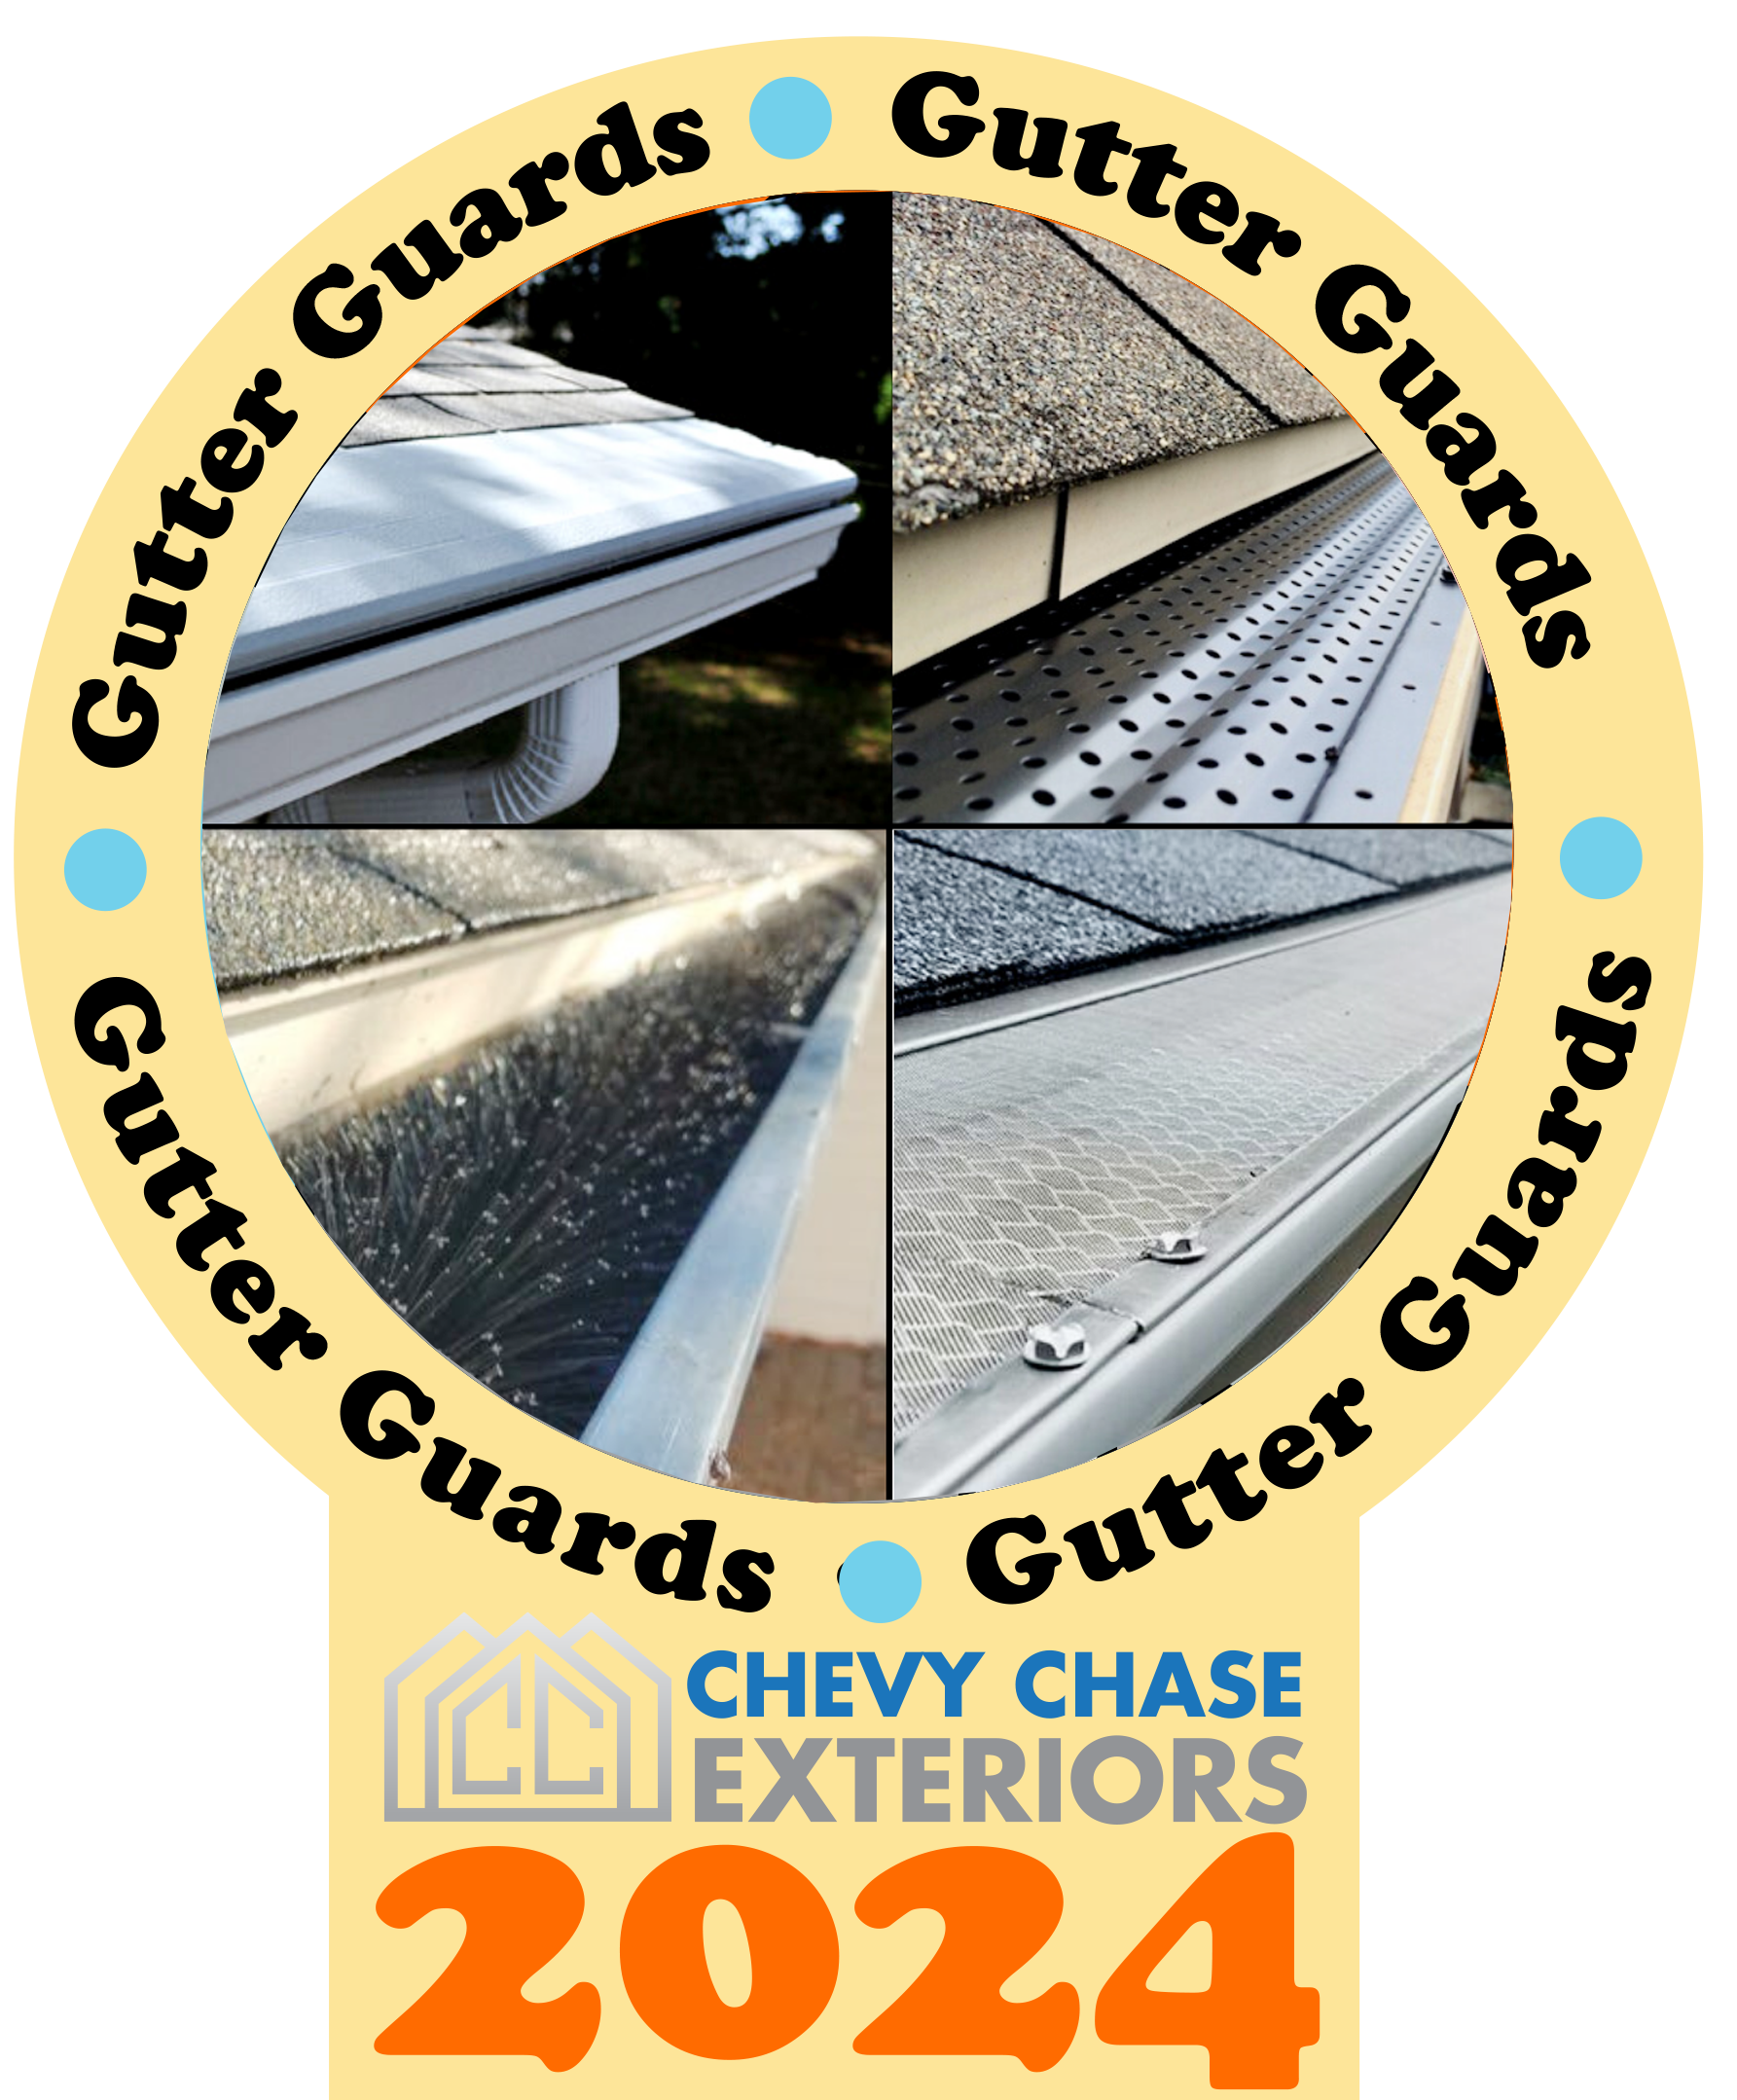 Gutter services seal with the company logo